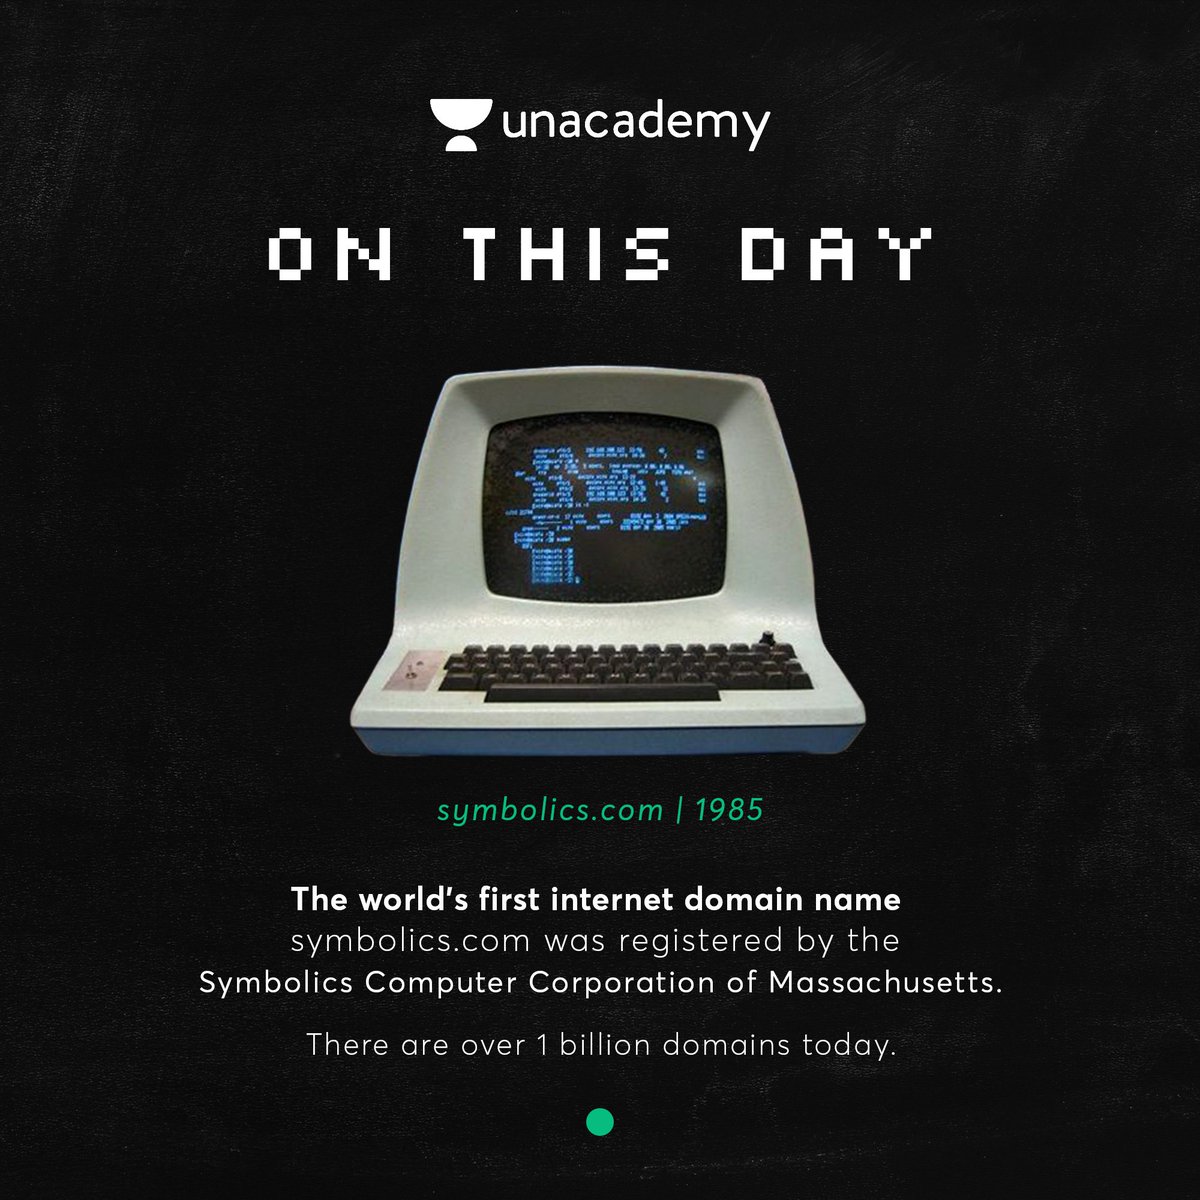 Unacademy on Twitter: "#OnThisDay in 1985, the first Internet domain name, https://t.co/ov57hyITdO was registered. https://t.co/kjT1otzwGr" / Twitter